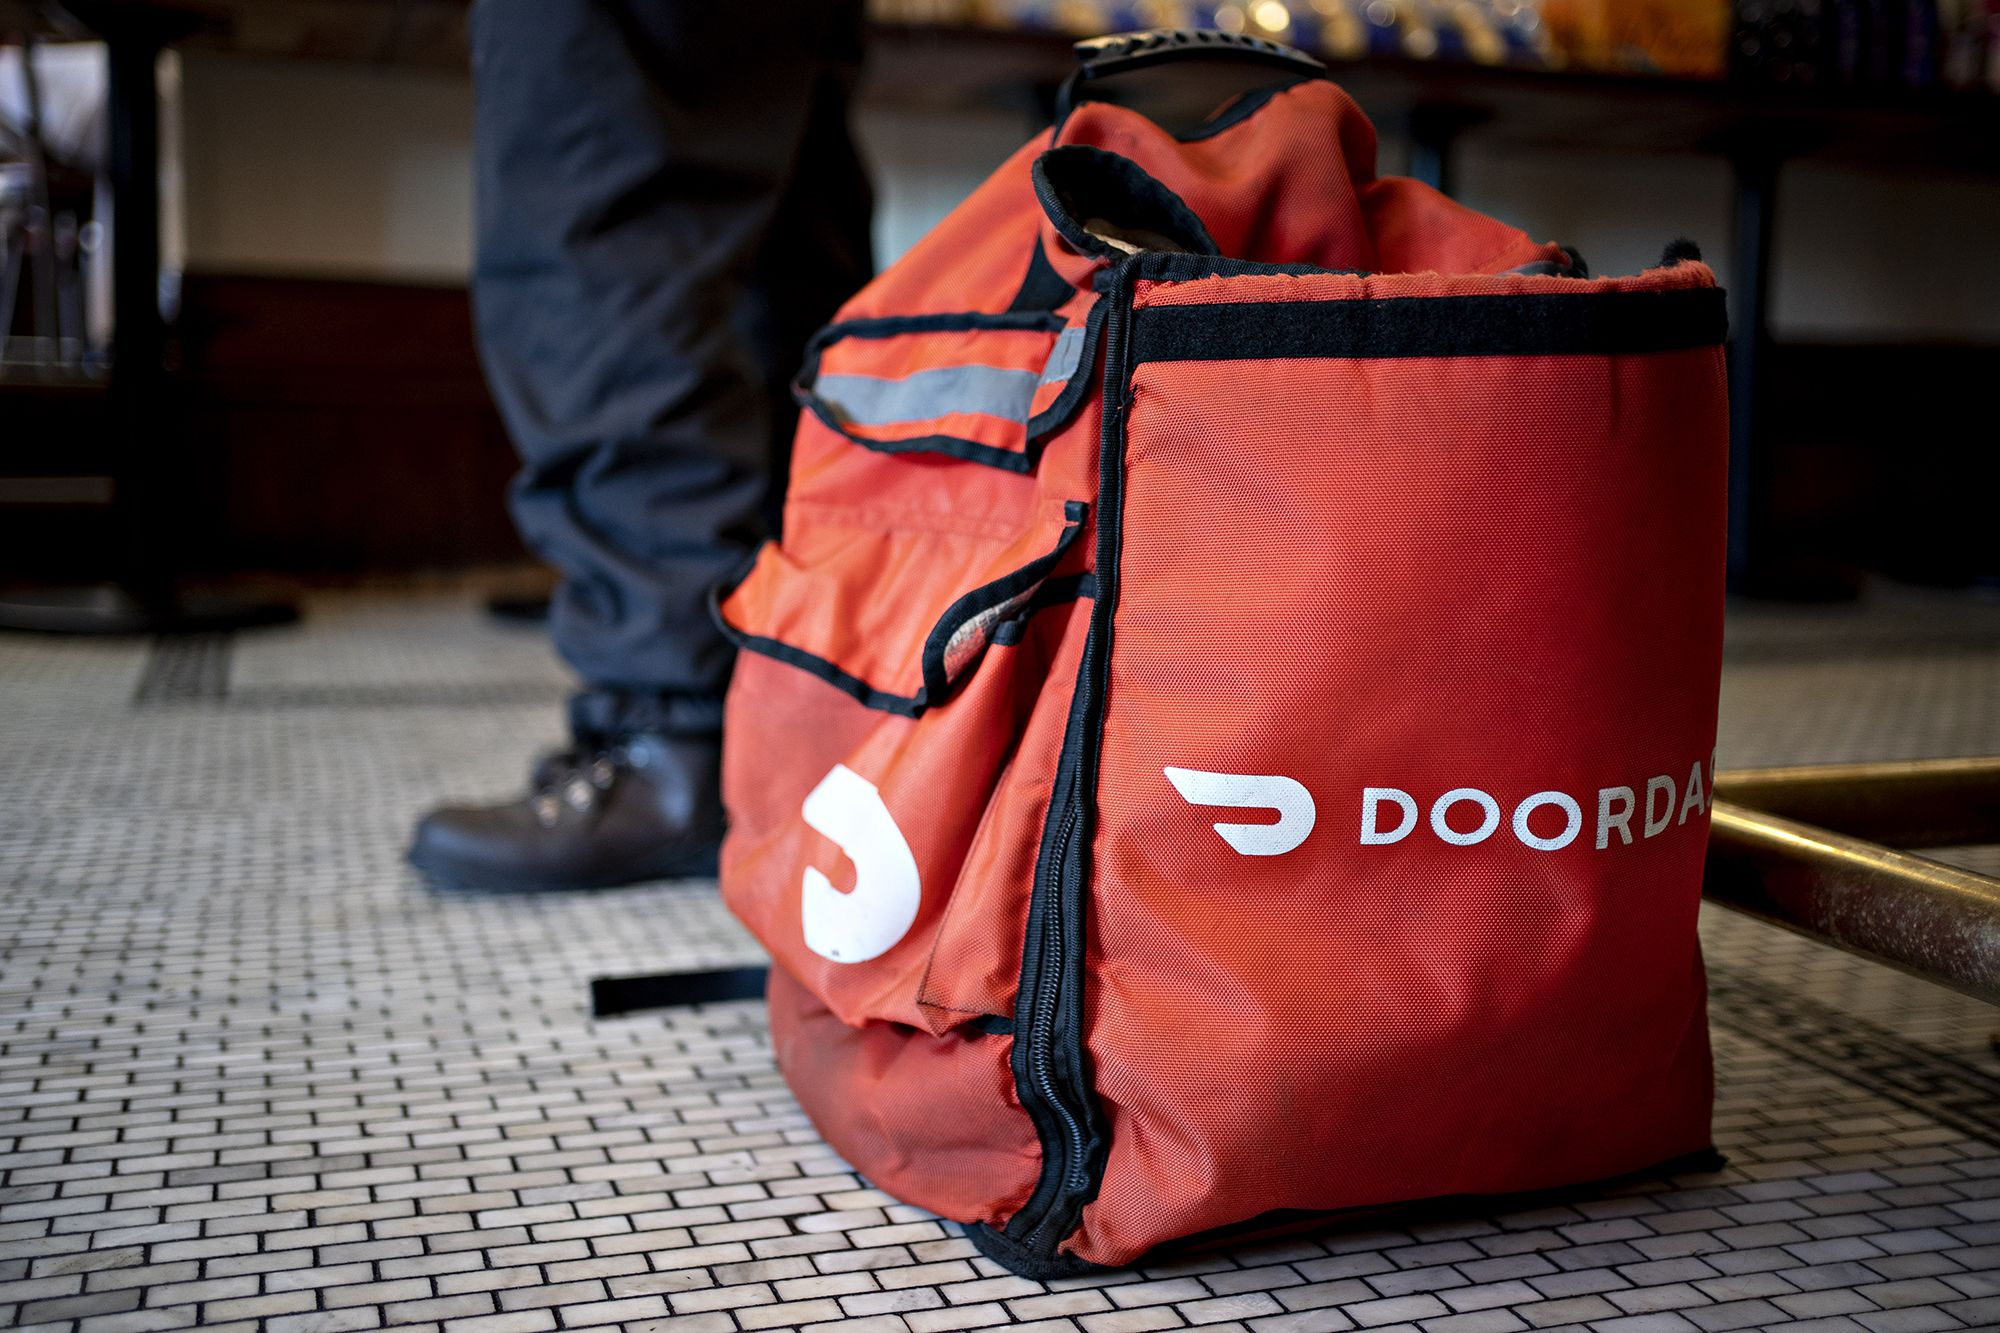 DoorDash launches online DashMart convenience stores to sell